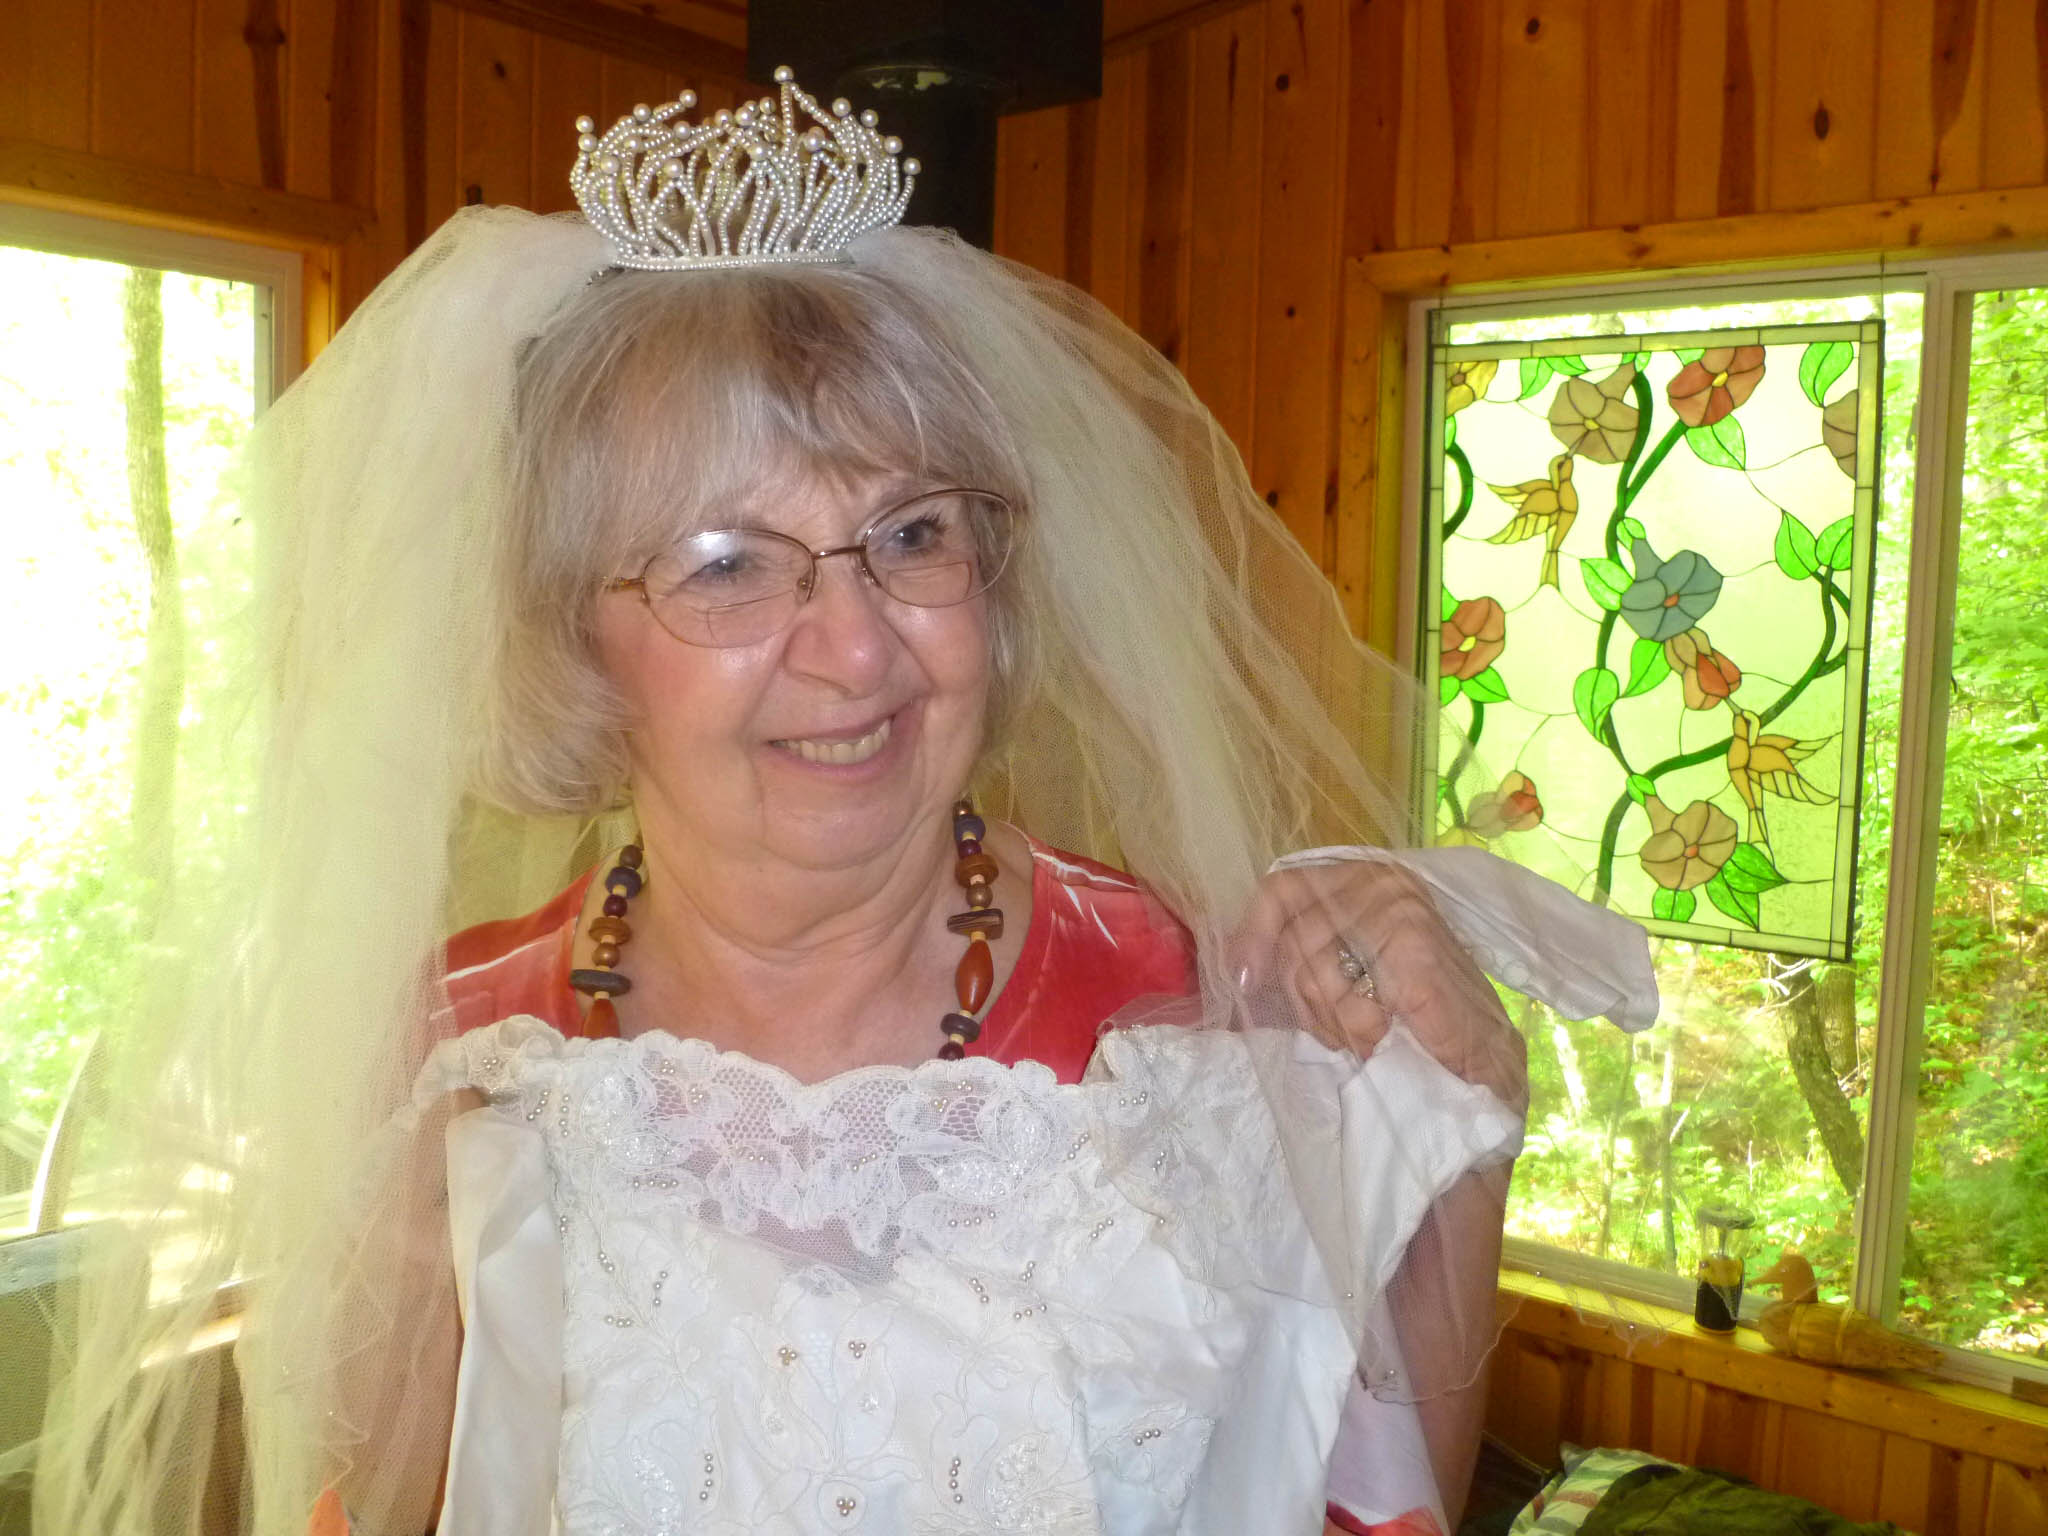 Mom at her 50th, with her wedding dress.